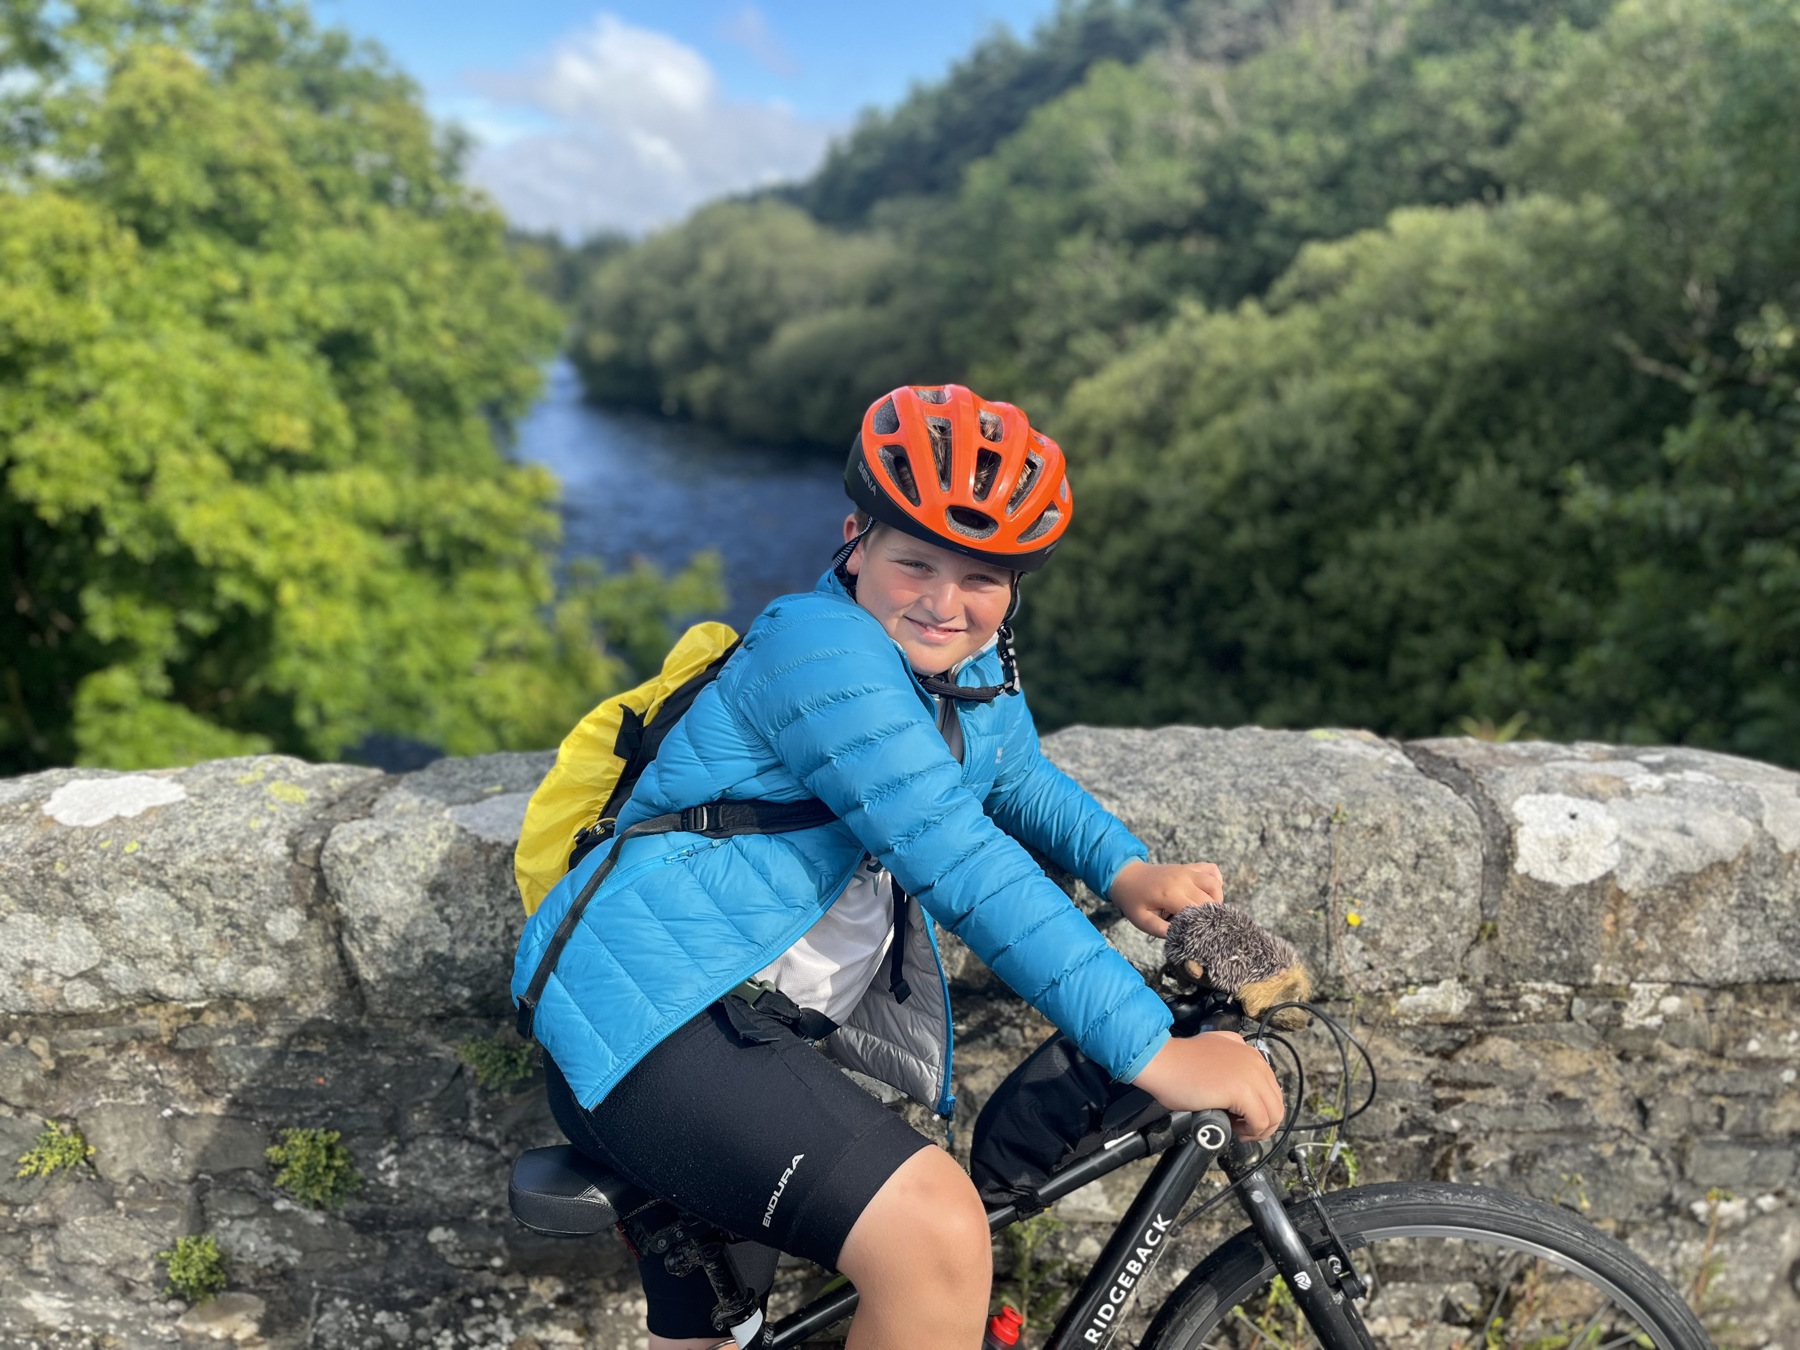 Harry on his bike on a stone bridge overlooking a river. He's wearing a red helmet.